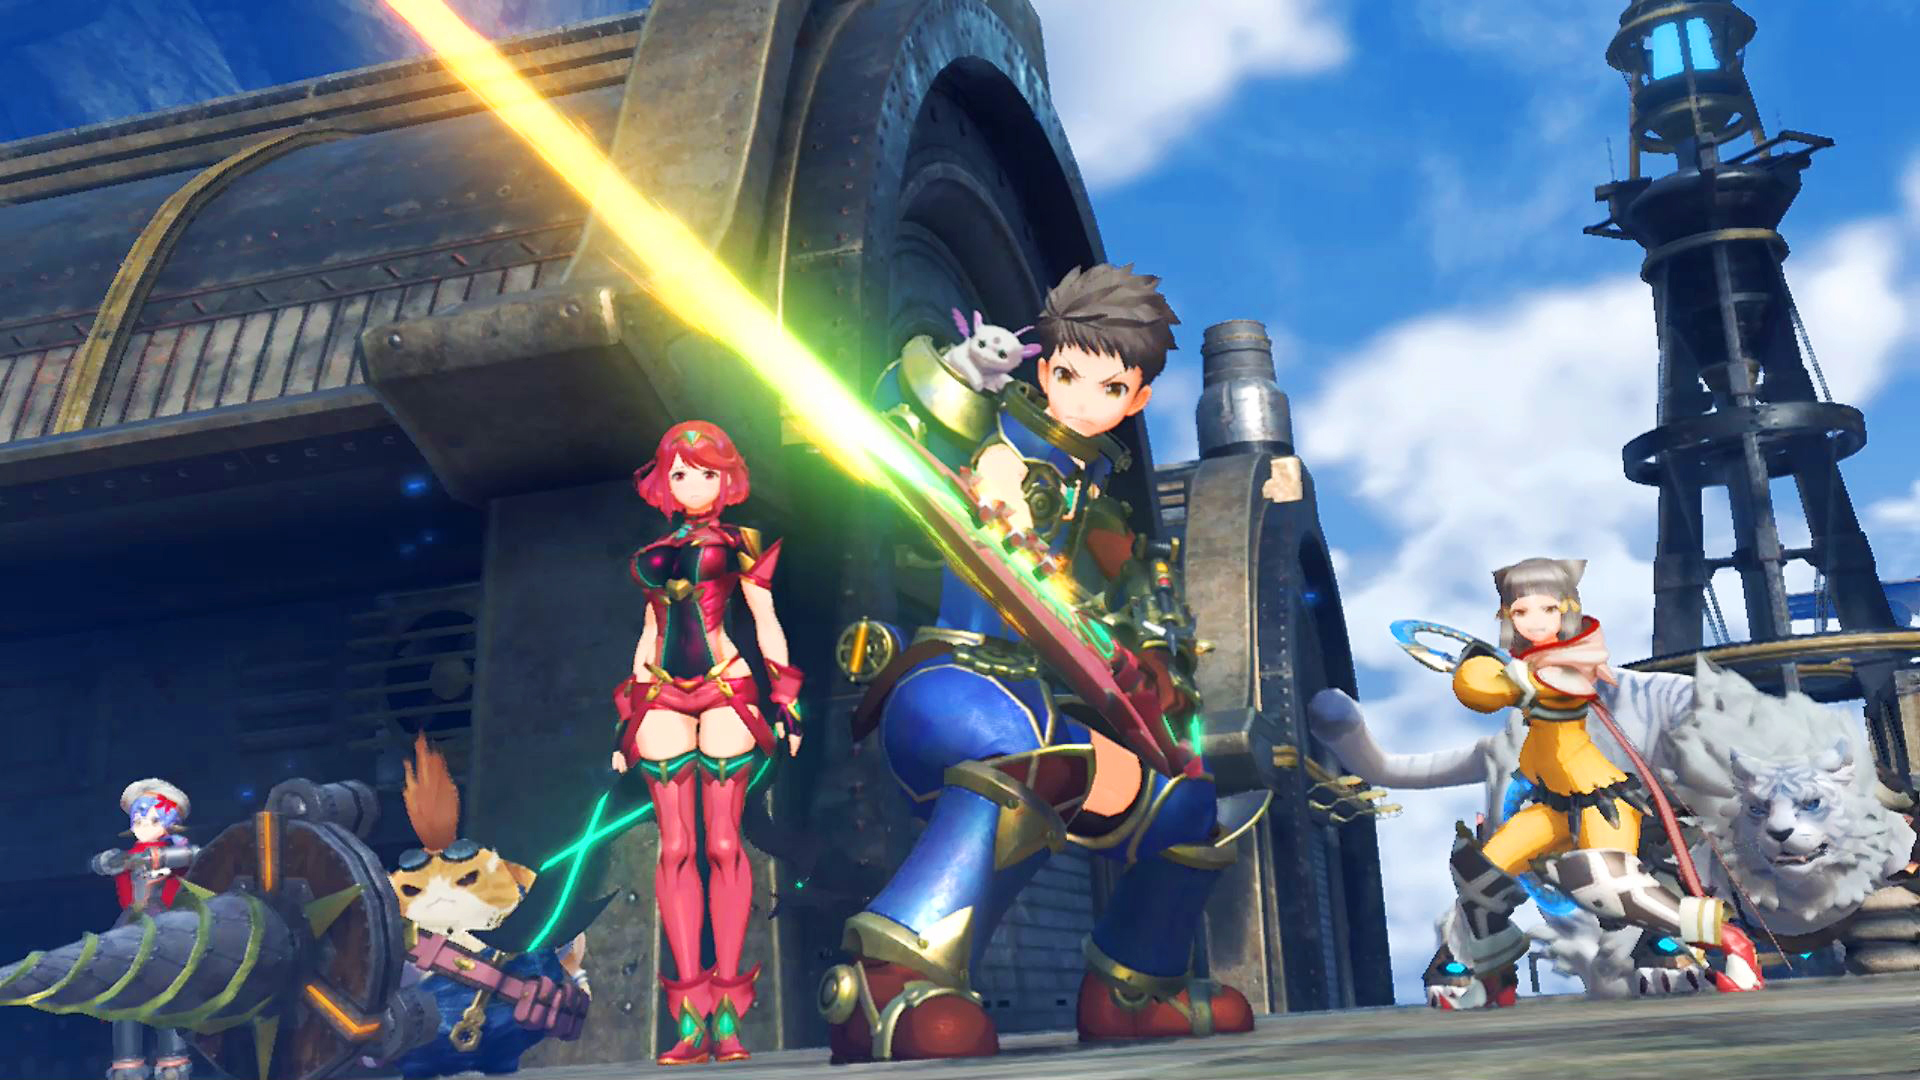 Xenoblade Chronicles 3 characters – the new recruits